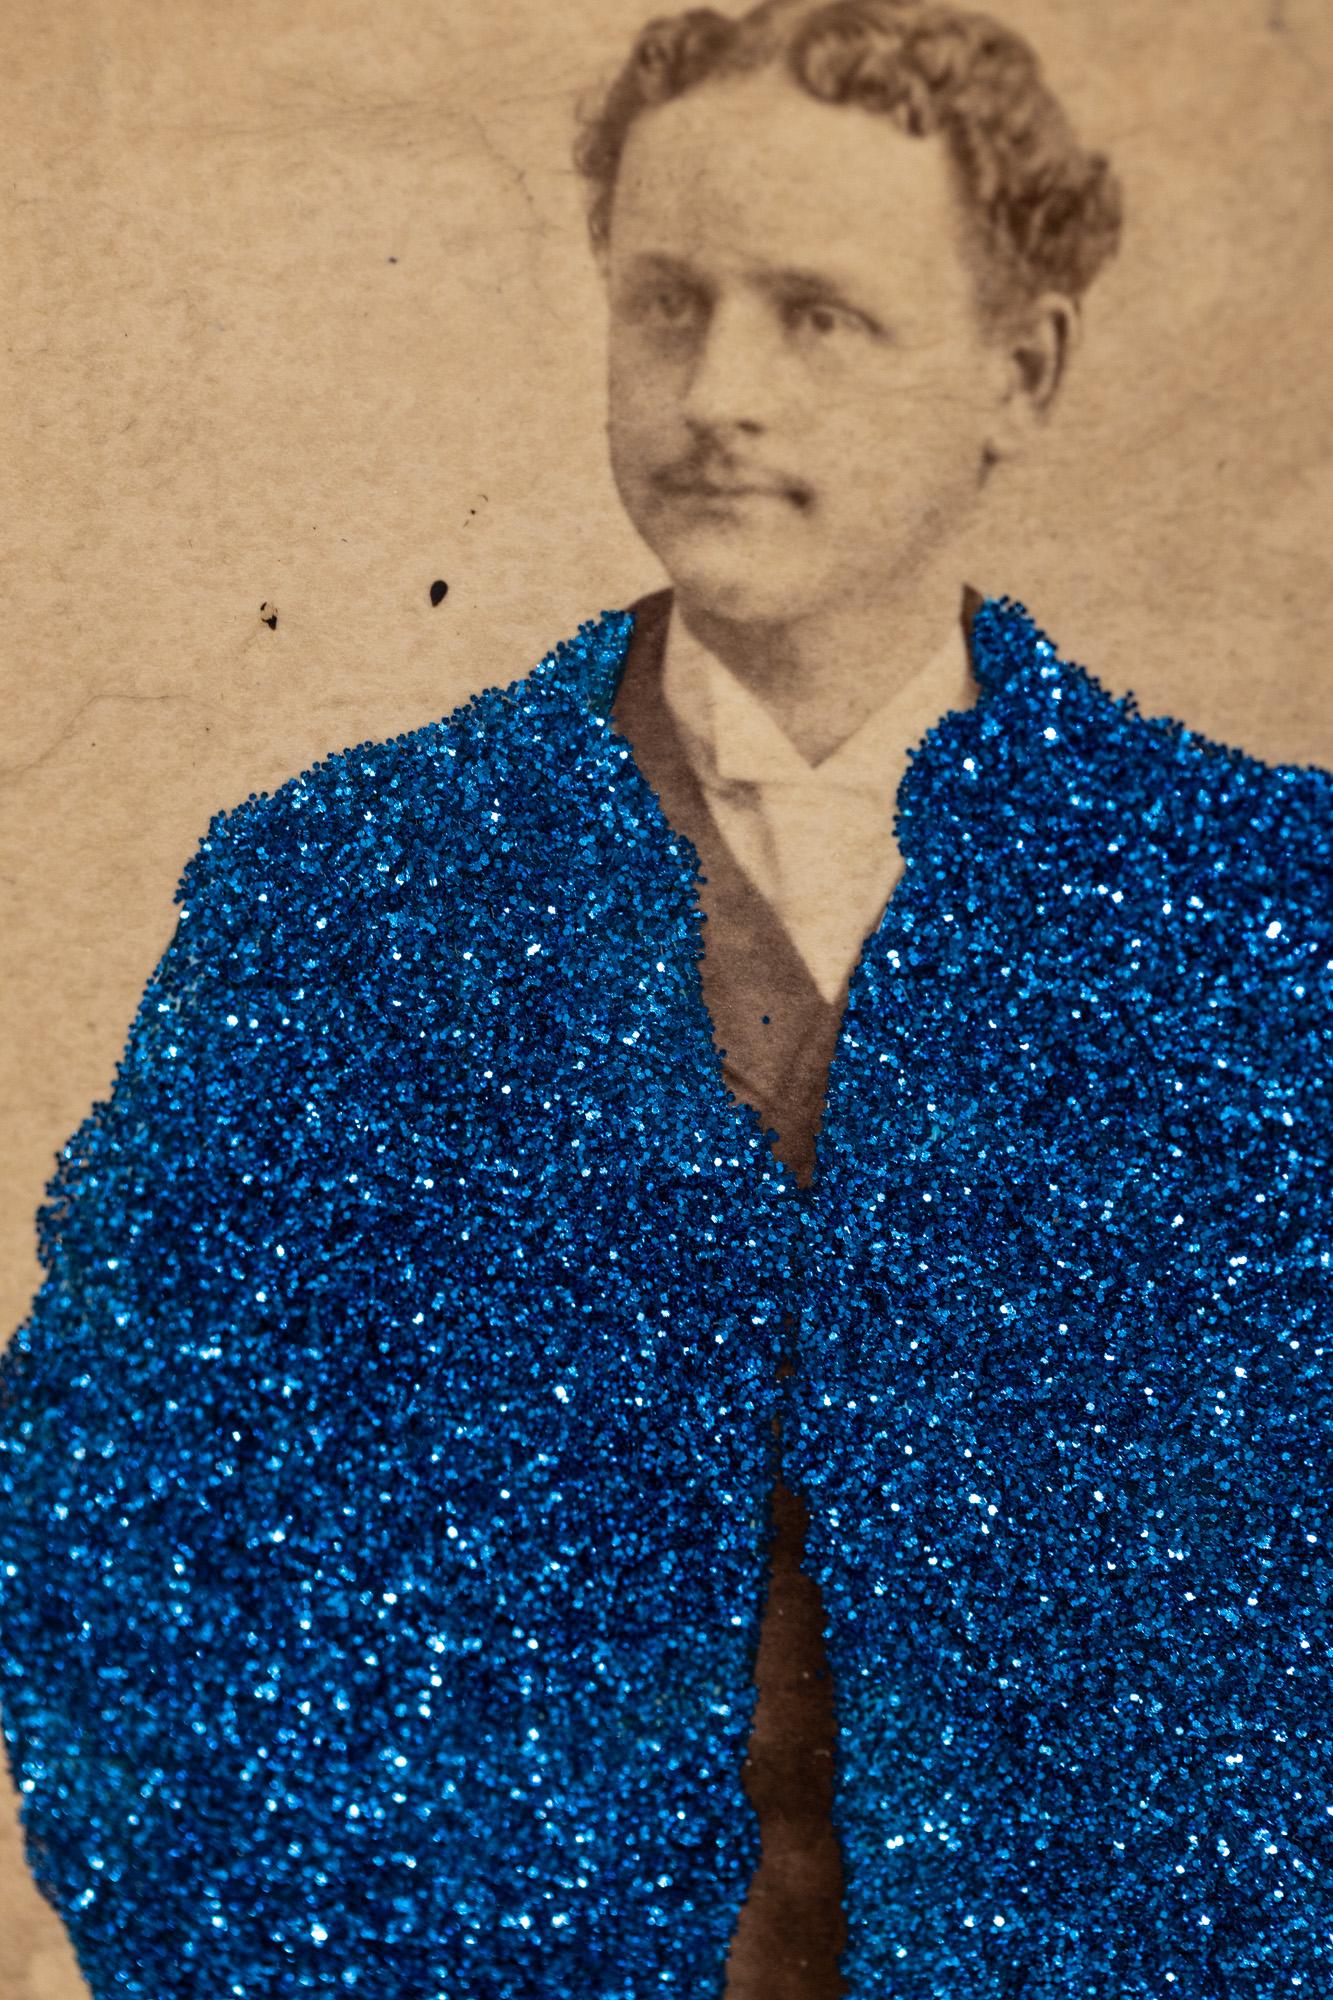 Man in Blue Glitter - Contemporary Photograph by André Schulze